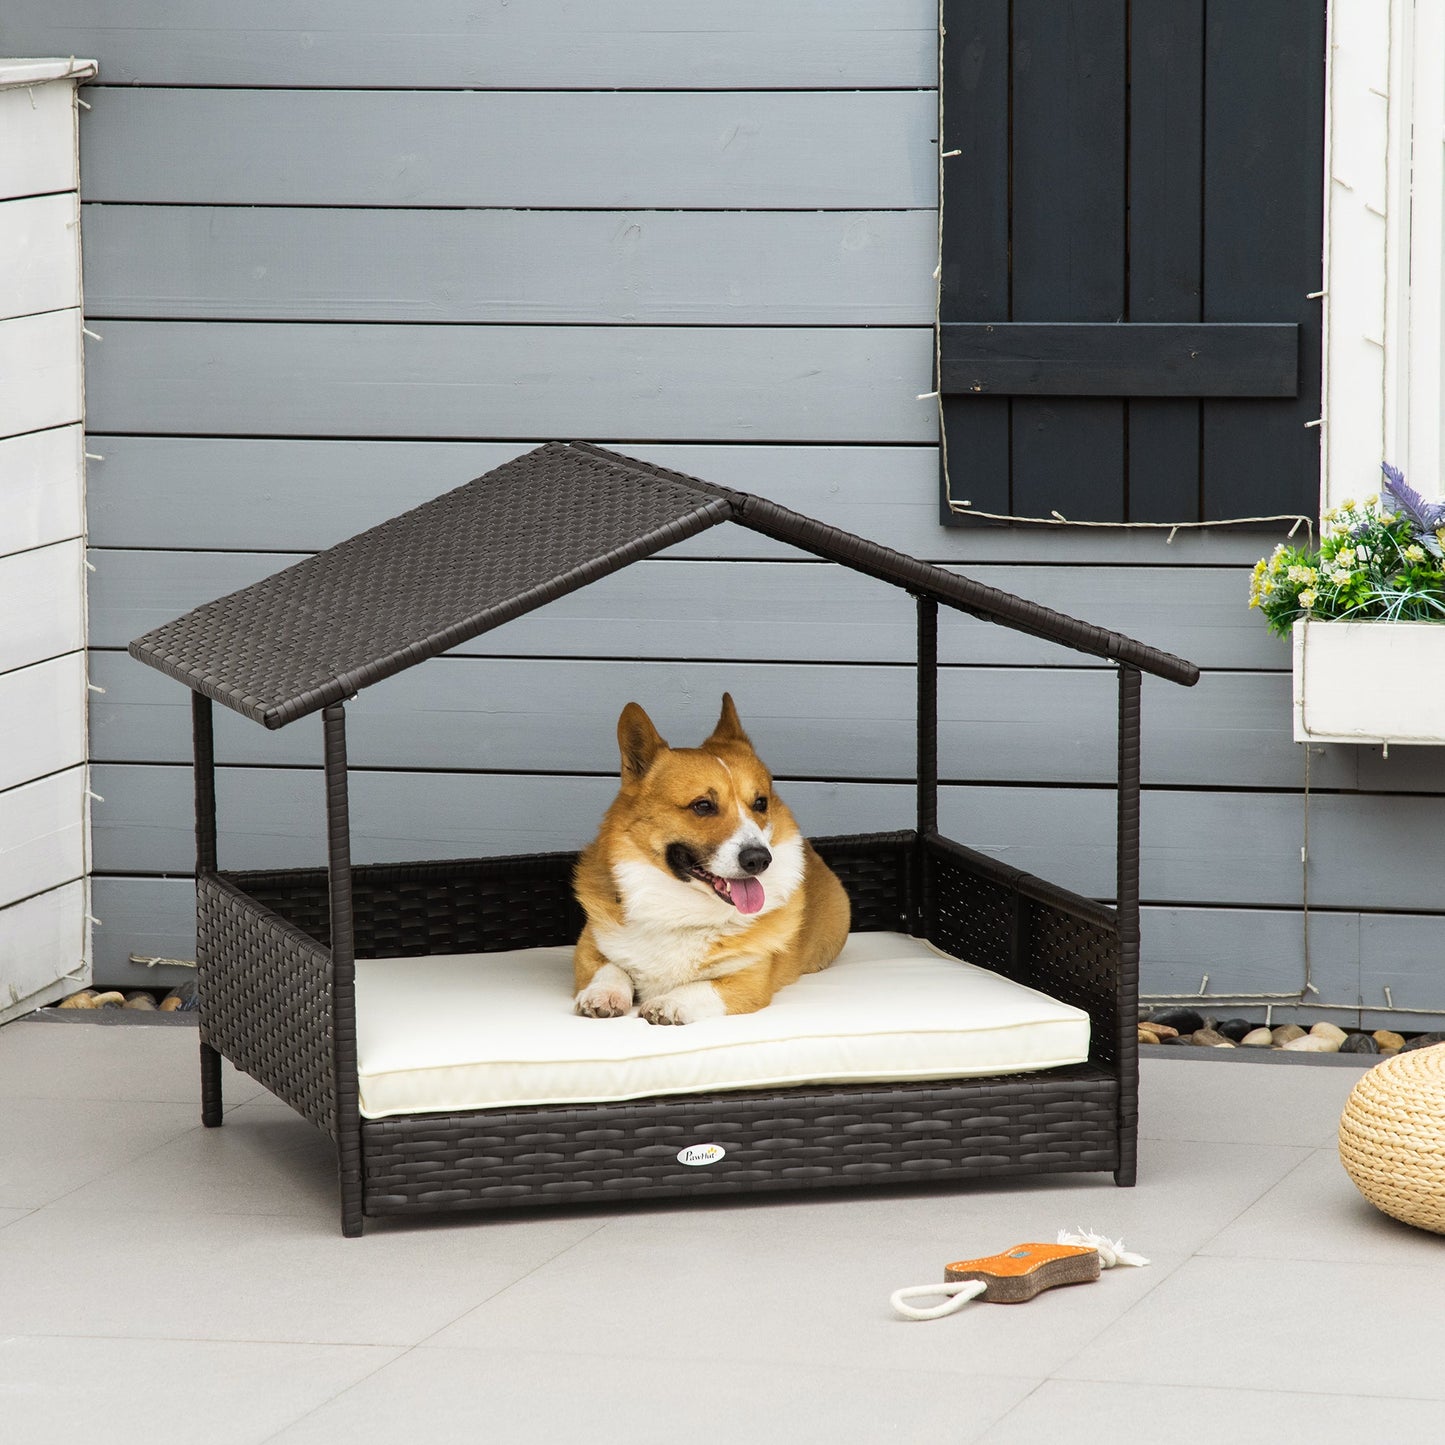 Pet Supplies-Wicker Dog House Elevated Raised Rattan Bed for Indoor/Outdoor with Removable Cushion Lounge, Cream - Outdoor Style Company